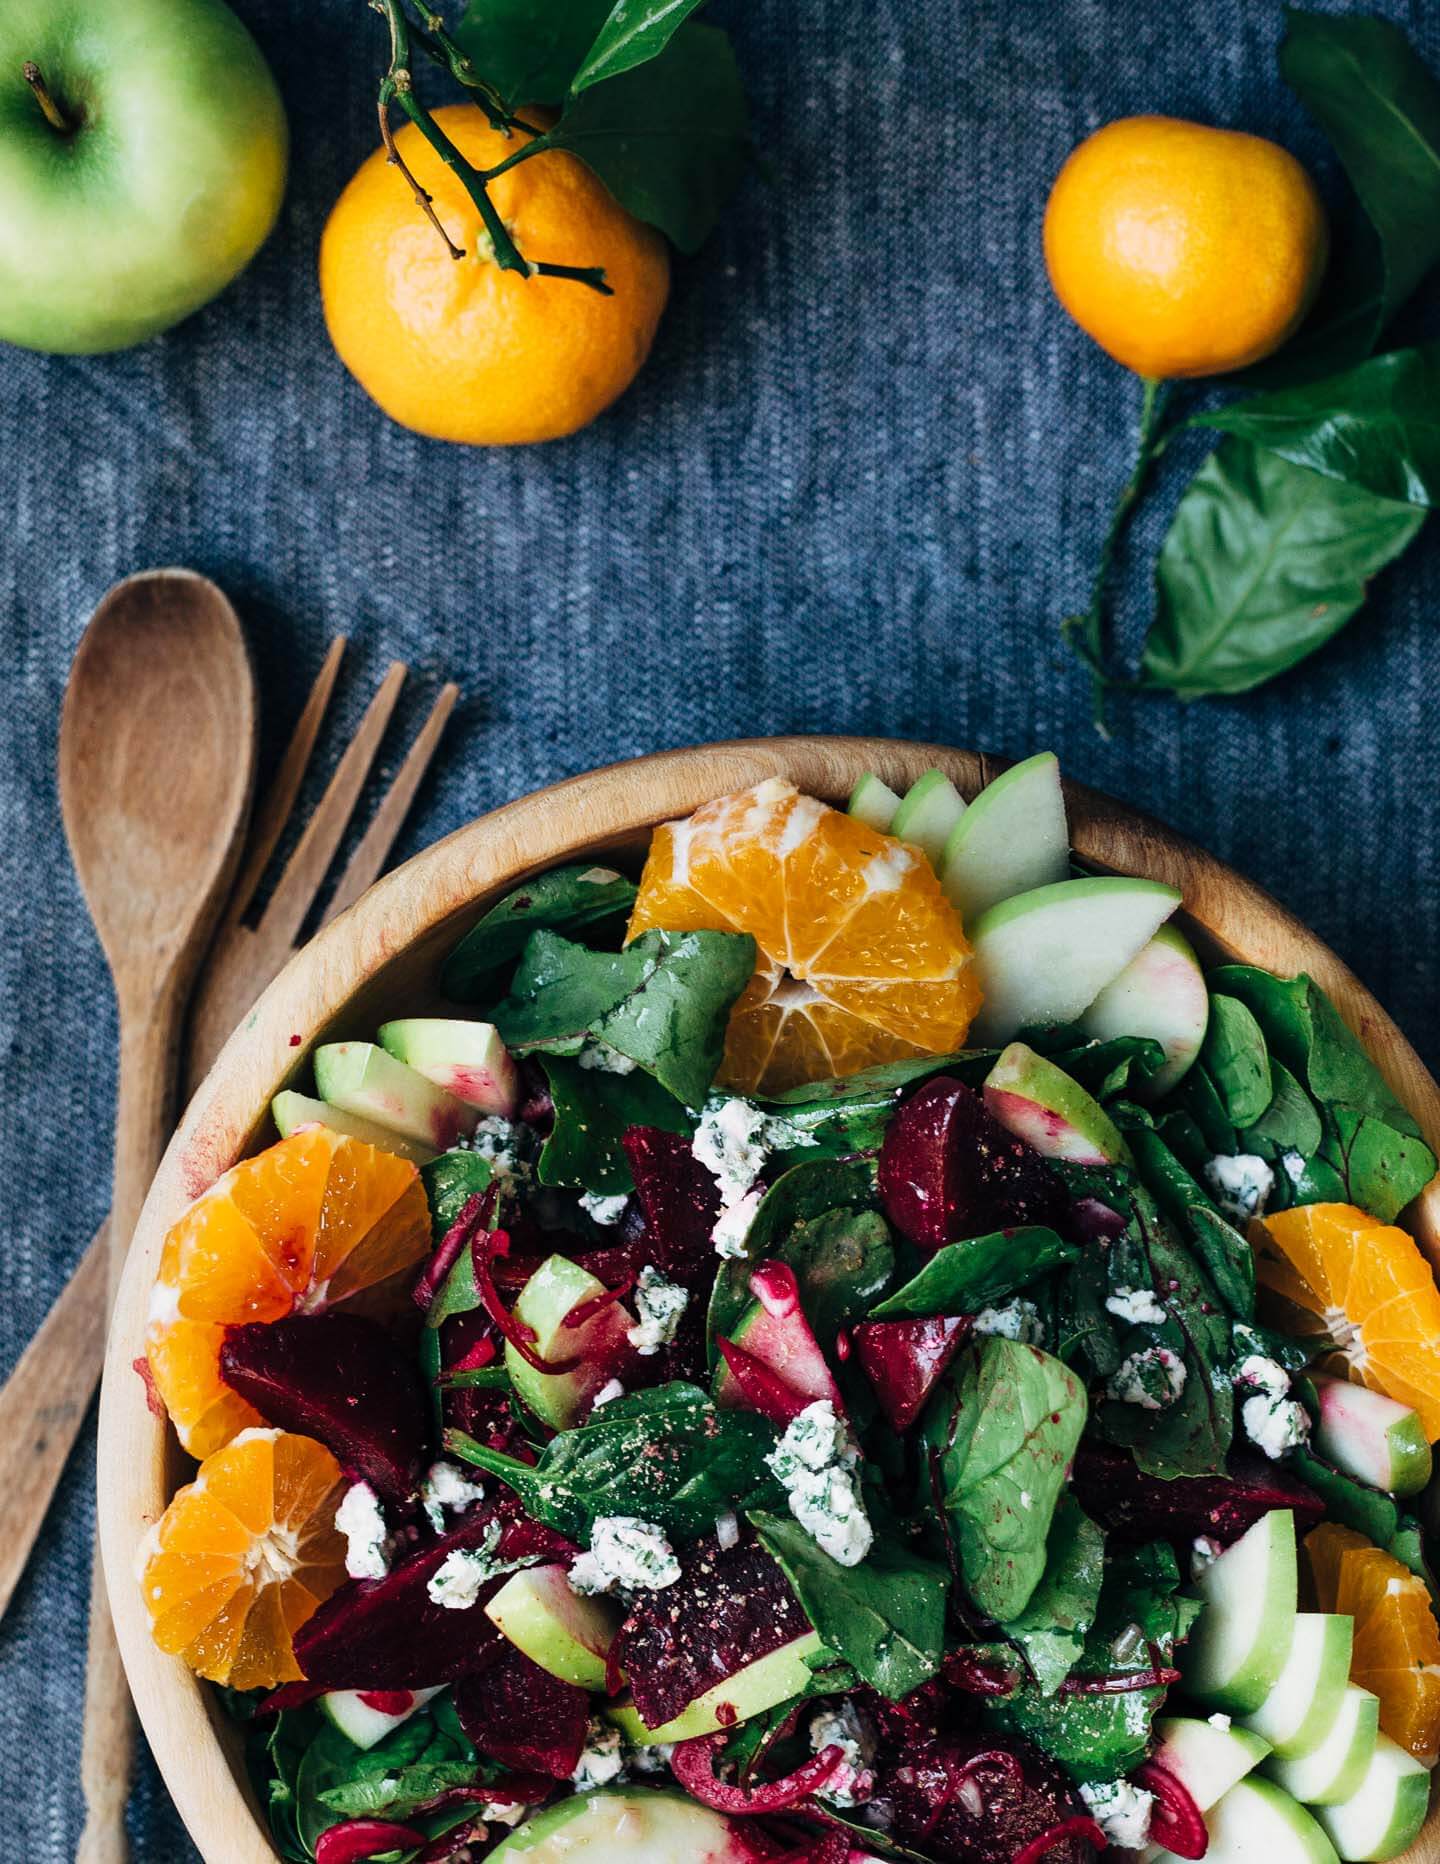 A bright and crunchy green apple and beet salad recipe featuring sliced green apples, marinated beets tossed with red wine vinegar and shallot, beet greens, spinach, herbed goat cheese crumbles, and a simple vinaigrette. 